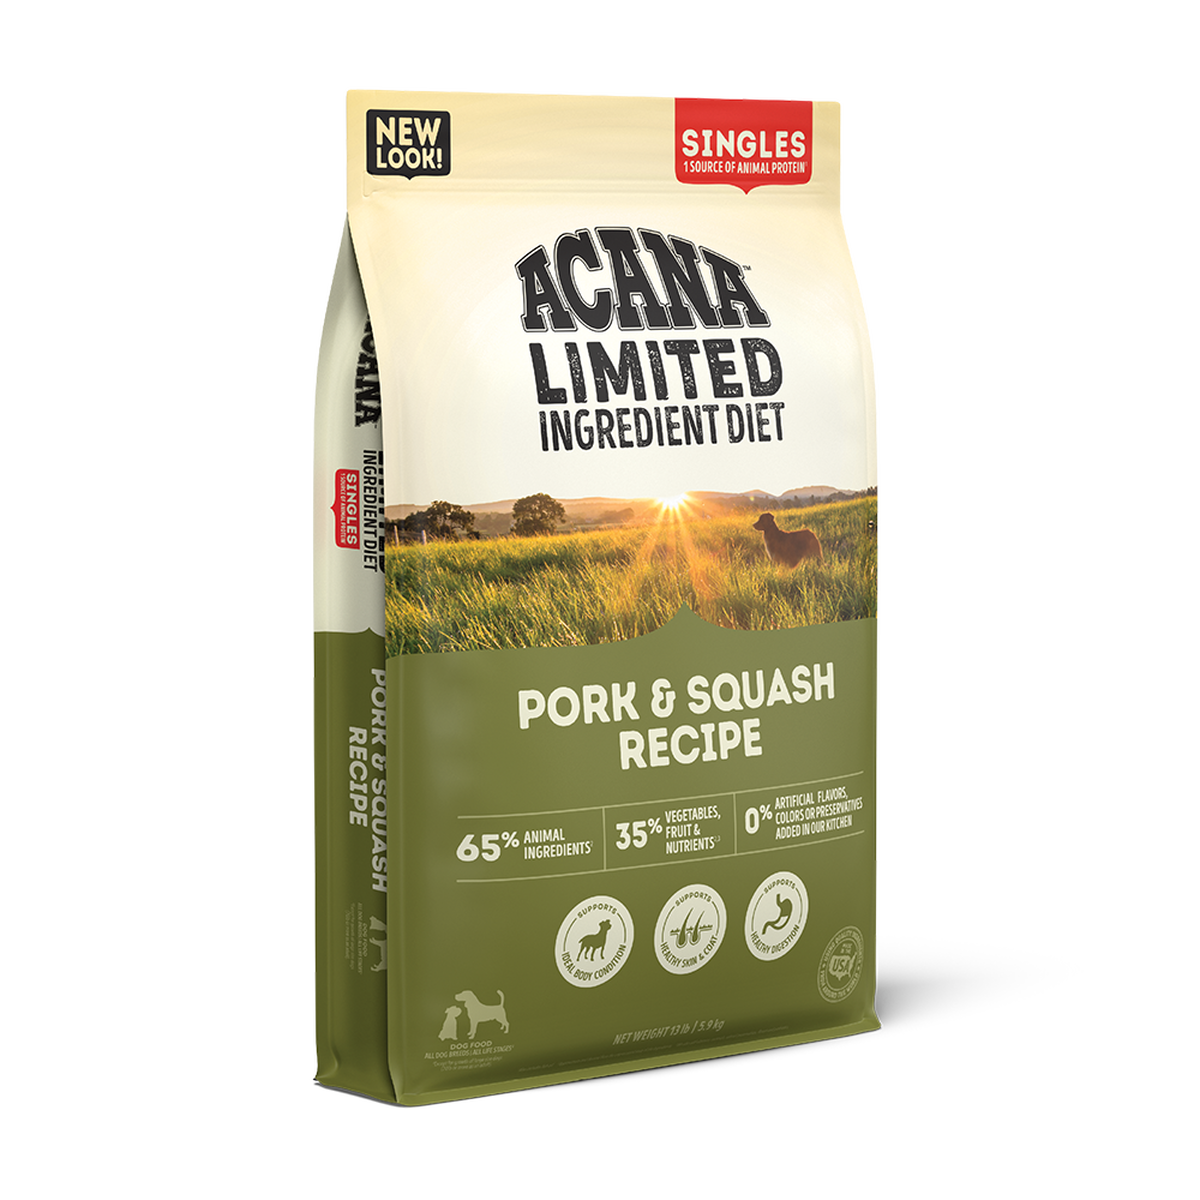 how many calories are in a cup of acana dog food